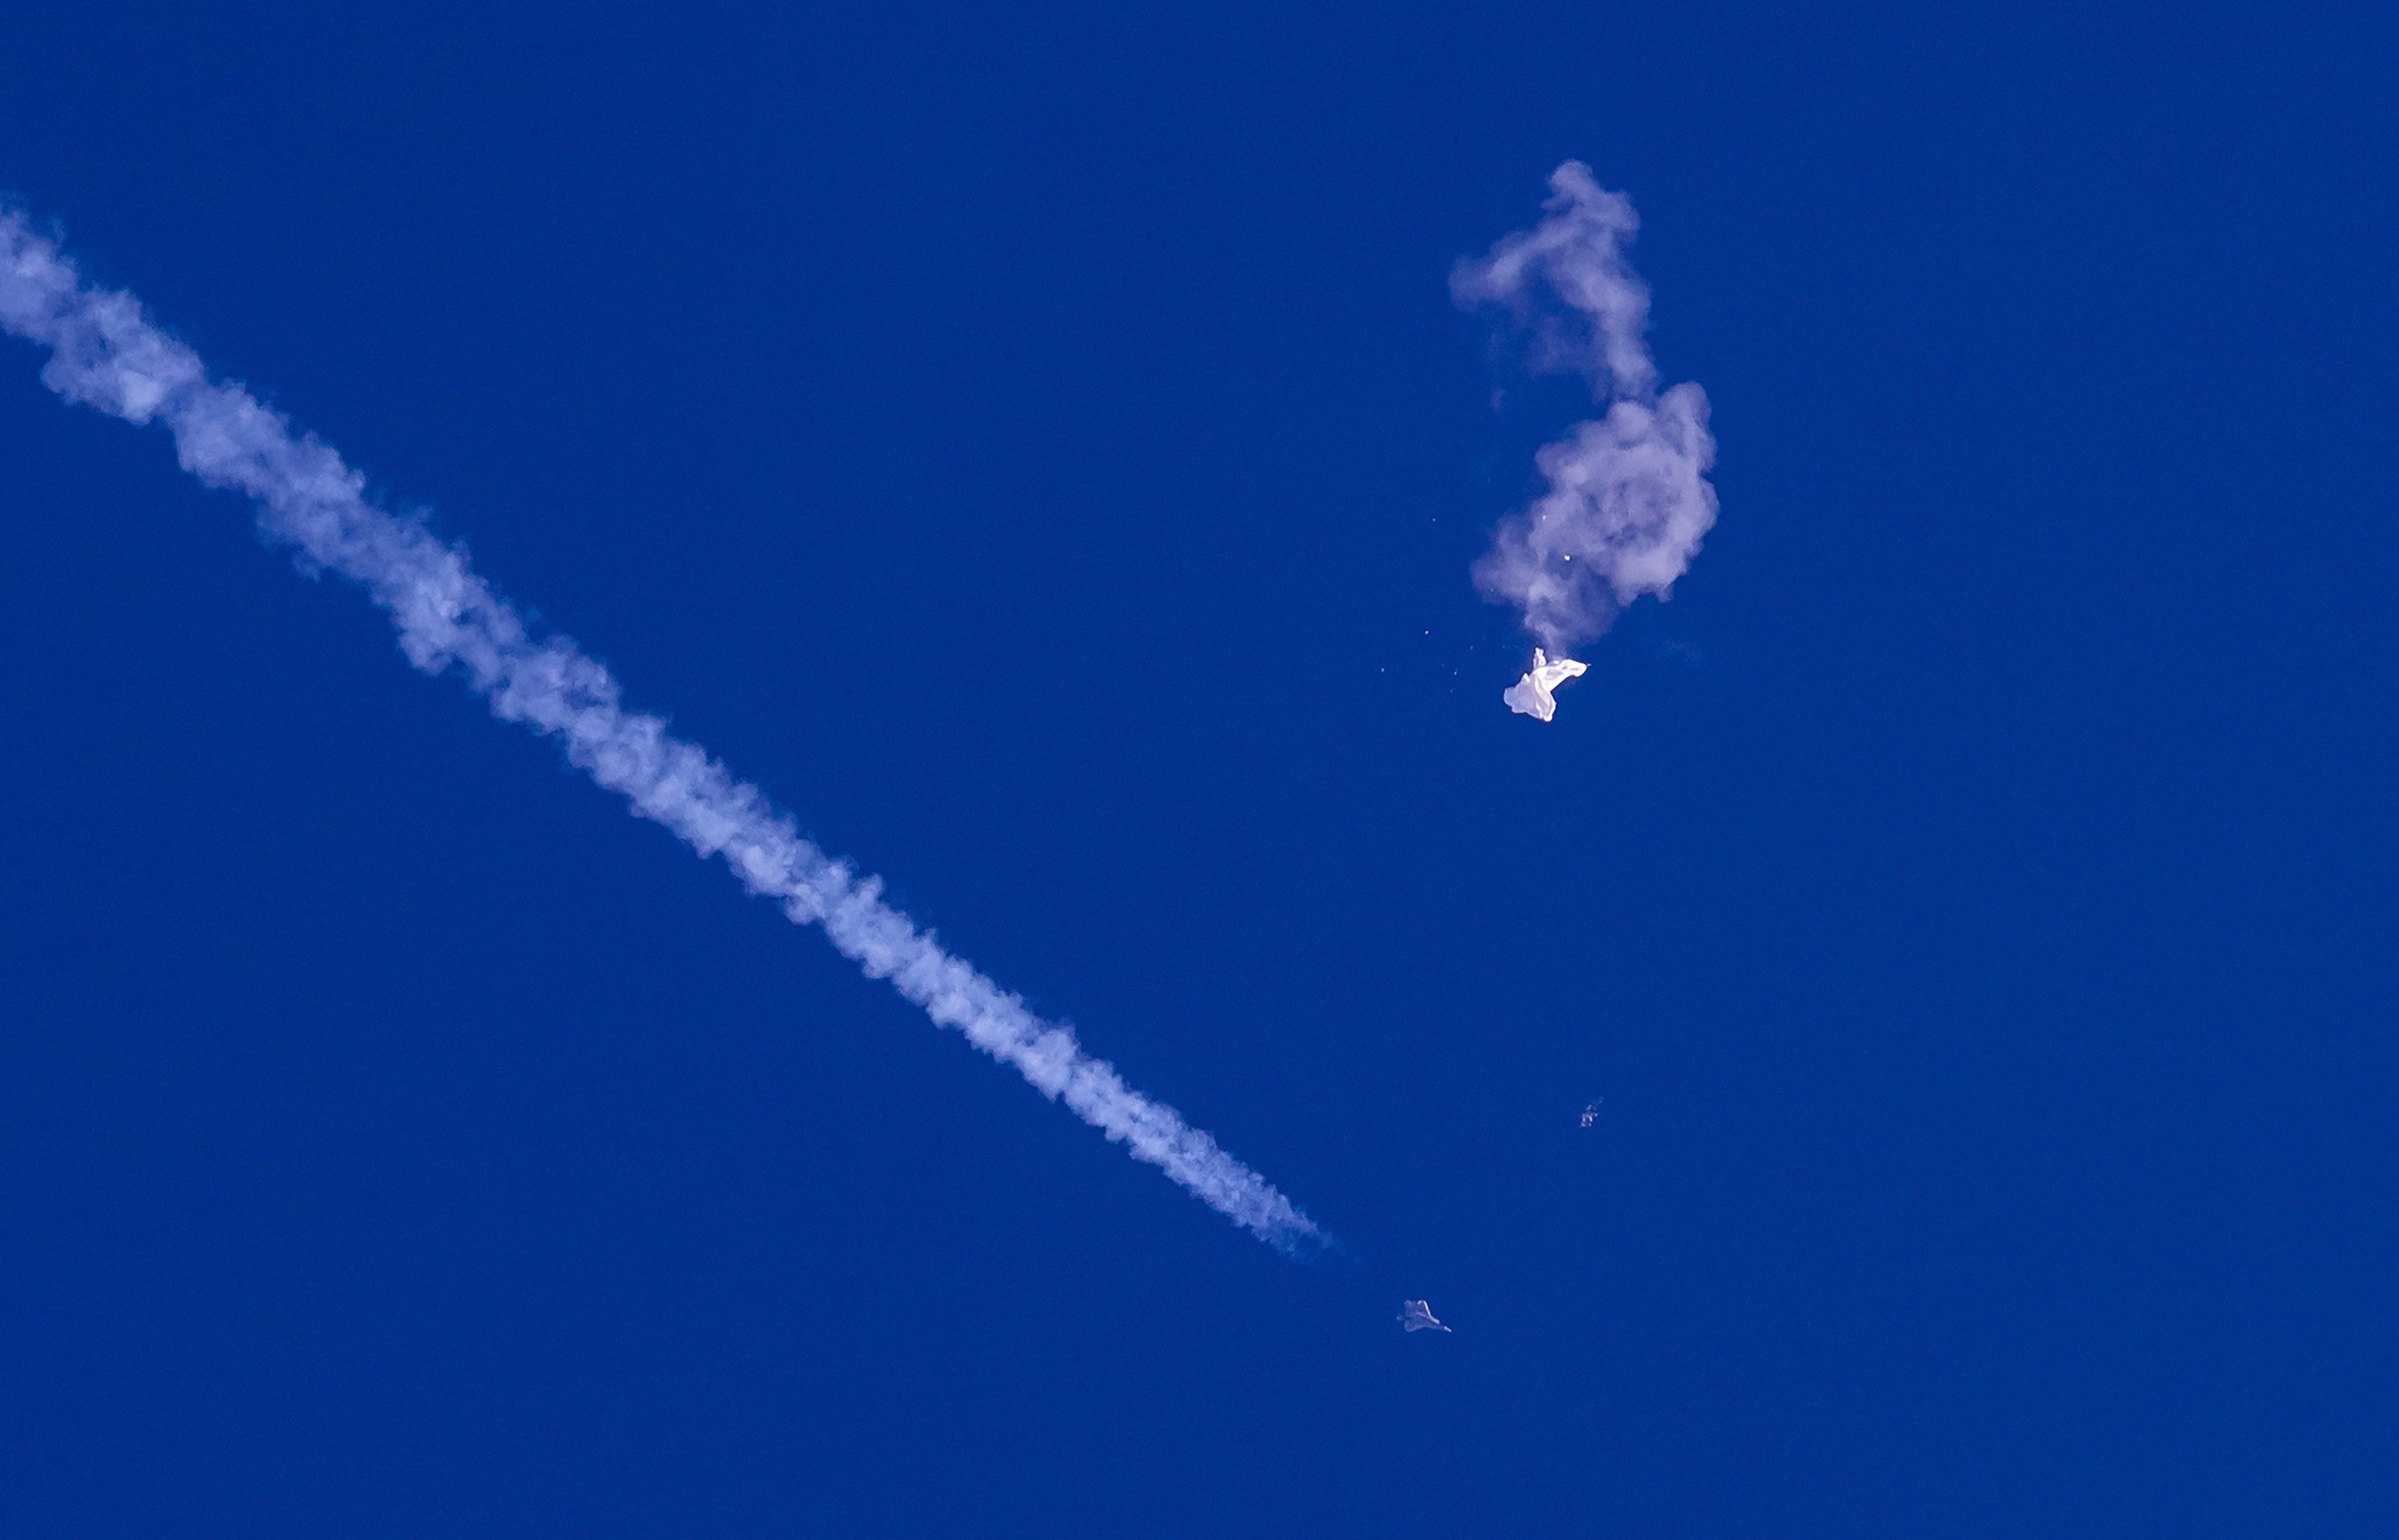 The remnants of a Chinese surveillance balloon drift above the Atlantic Ocean, just off the coast of South Carolina, on February 4. The incident has raised concerns about further deterioration in US-China relations and the need for diplomatic guardrails to keep events from spiralling out of control. Photo: AP